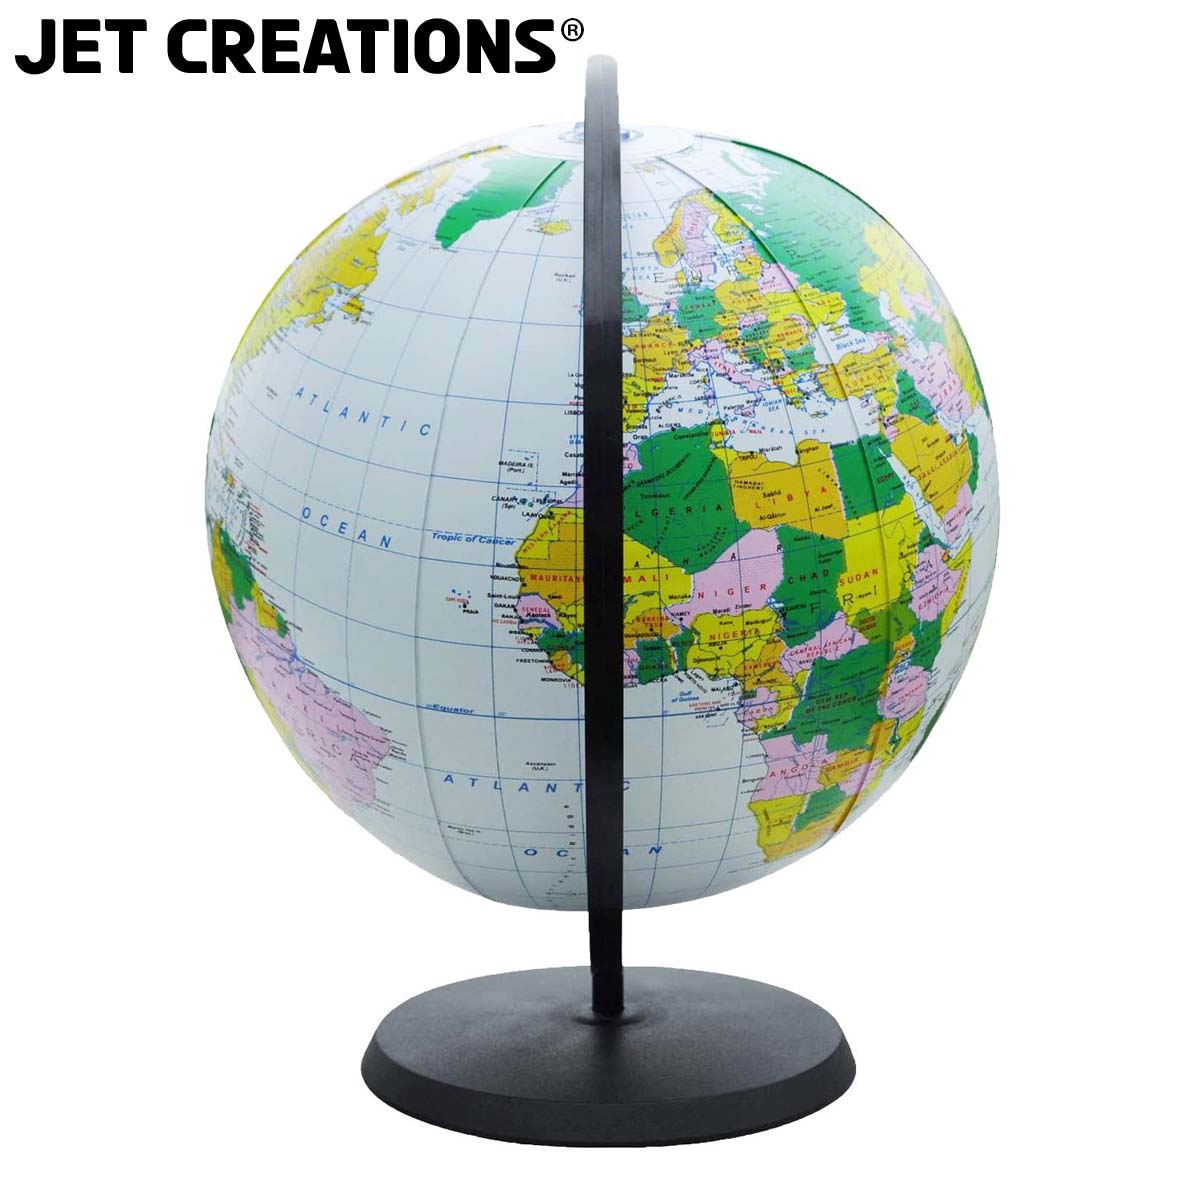 Inflatable Globes and Moon 3 Pack Feature Views of Planet Earth and Lunar  Ground and Craters. Size Range 12 and 16 inch. [JC-X0003]